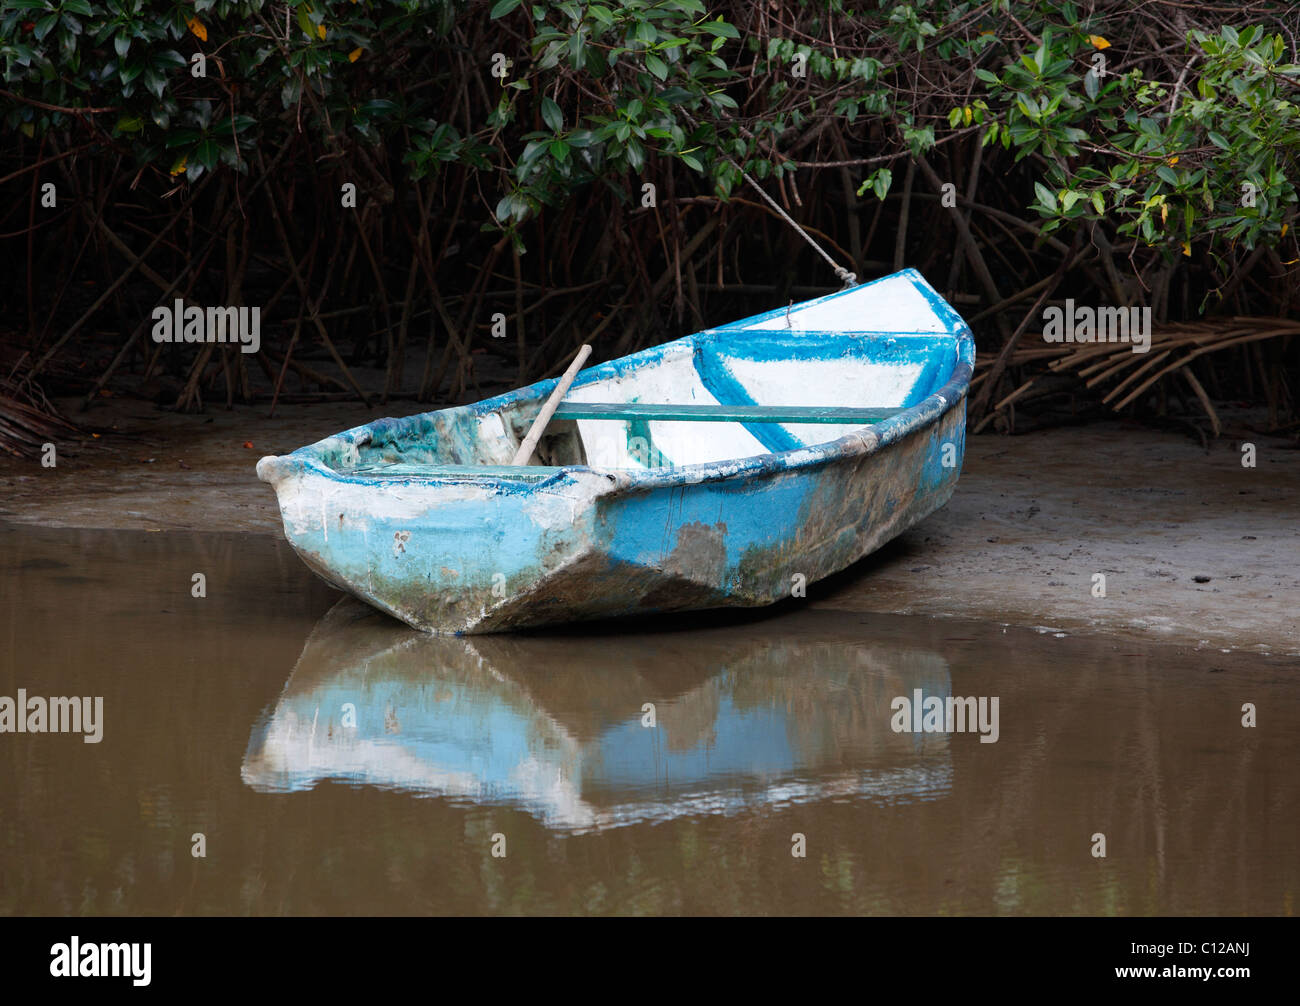 A small boat tied up to mangroves, Manuel Antonio, Costa Rica Stock Photo